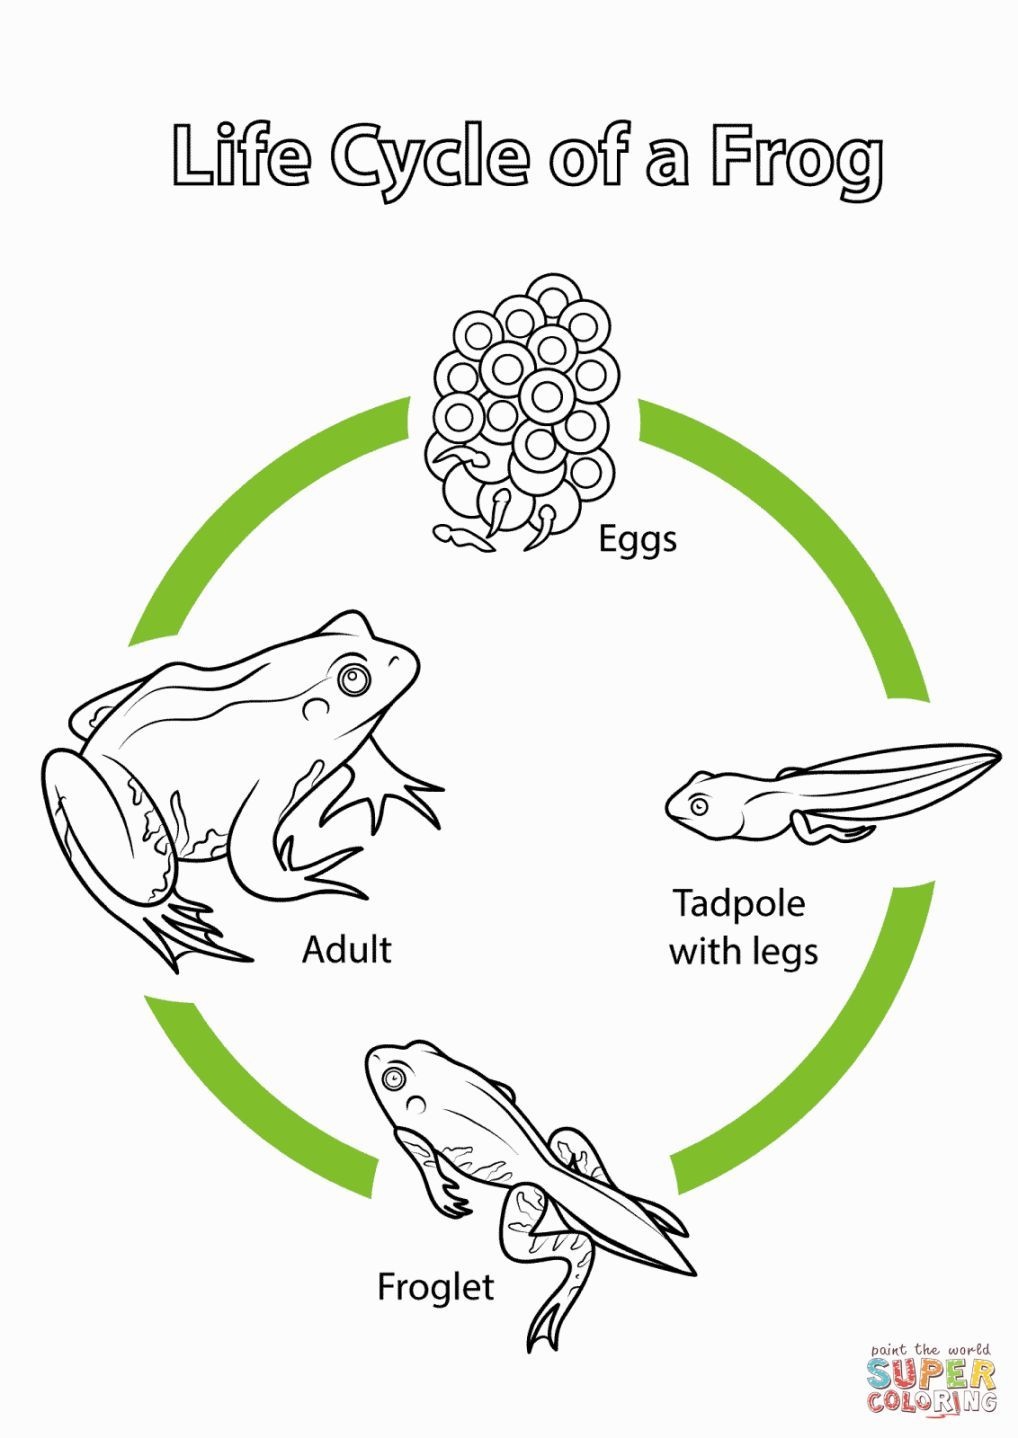 Frog Life Cycle Coloring Page | Coloring Pages | Frog Life - Life Cycle Of A Frog Free Printable Book